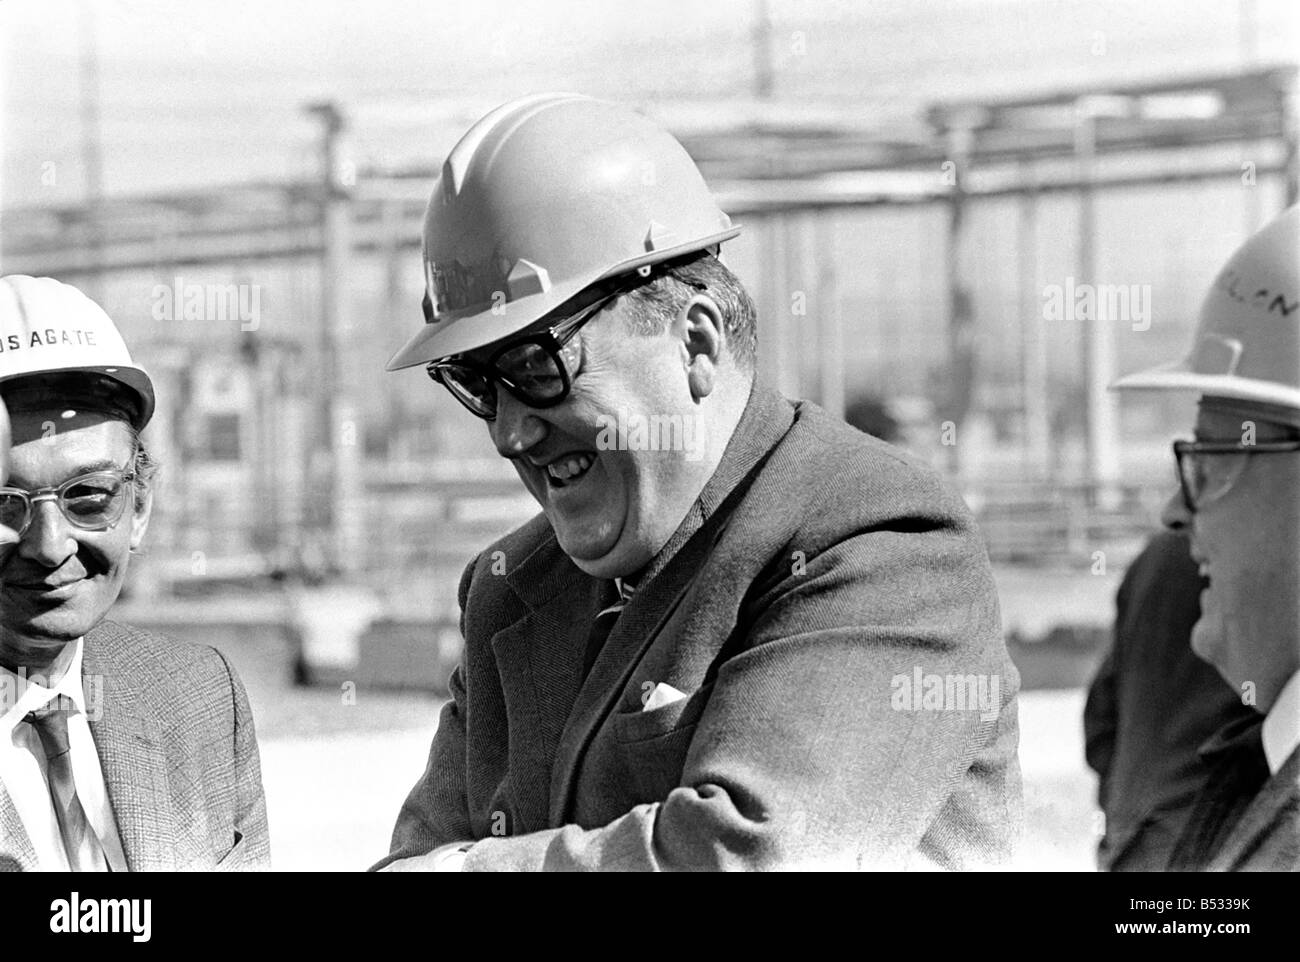 Northern Ireland Secretary Willie Whitelaw seen here during a visit to Du Pont factory in Londonderry. April 1972 72-4759-001 Stock Photo